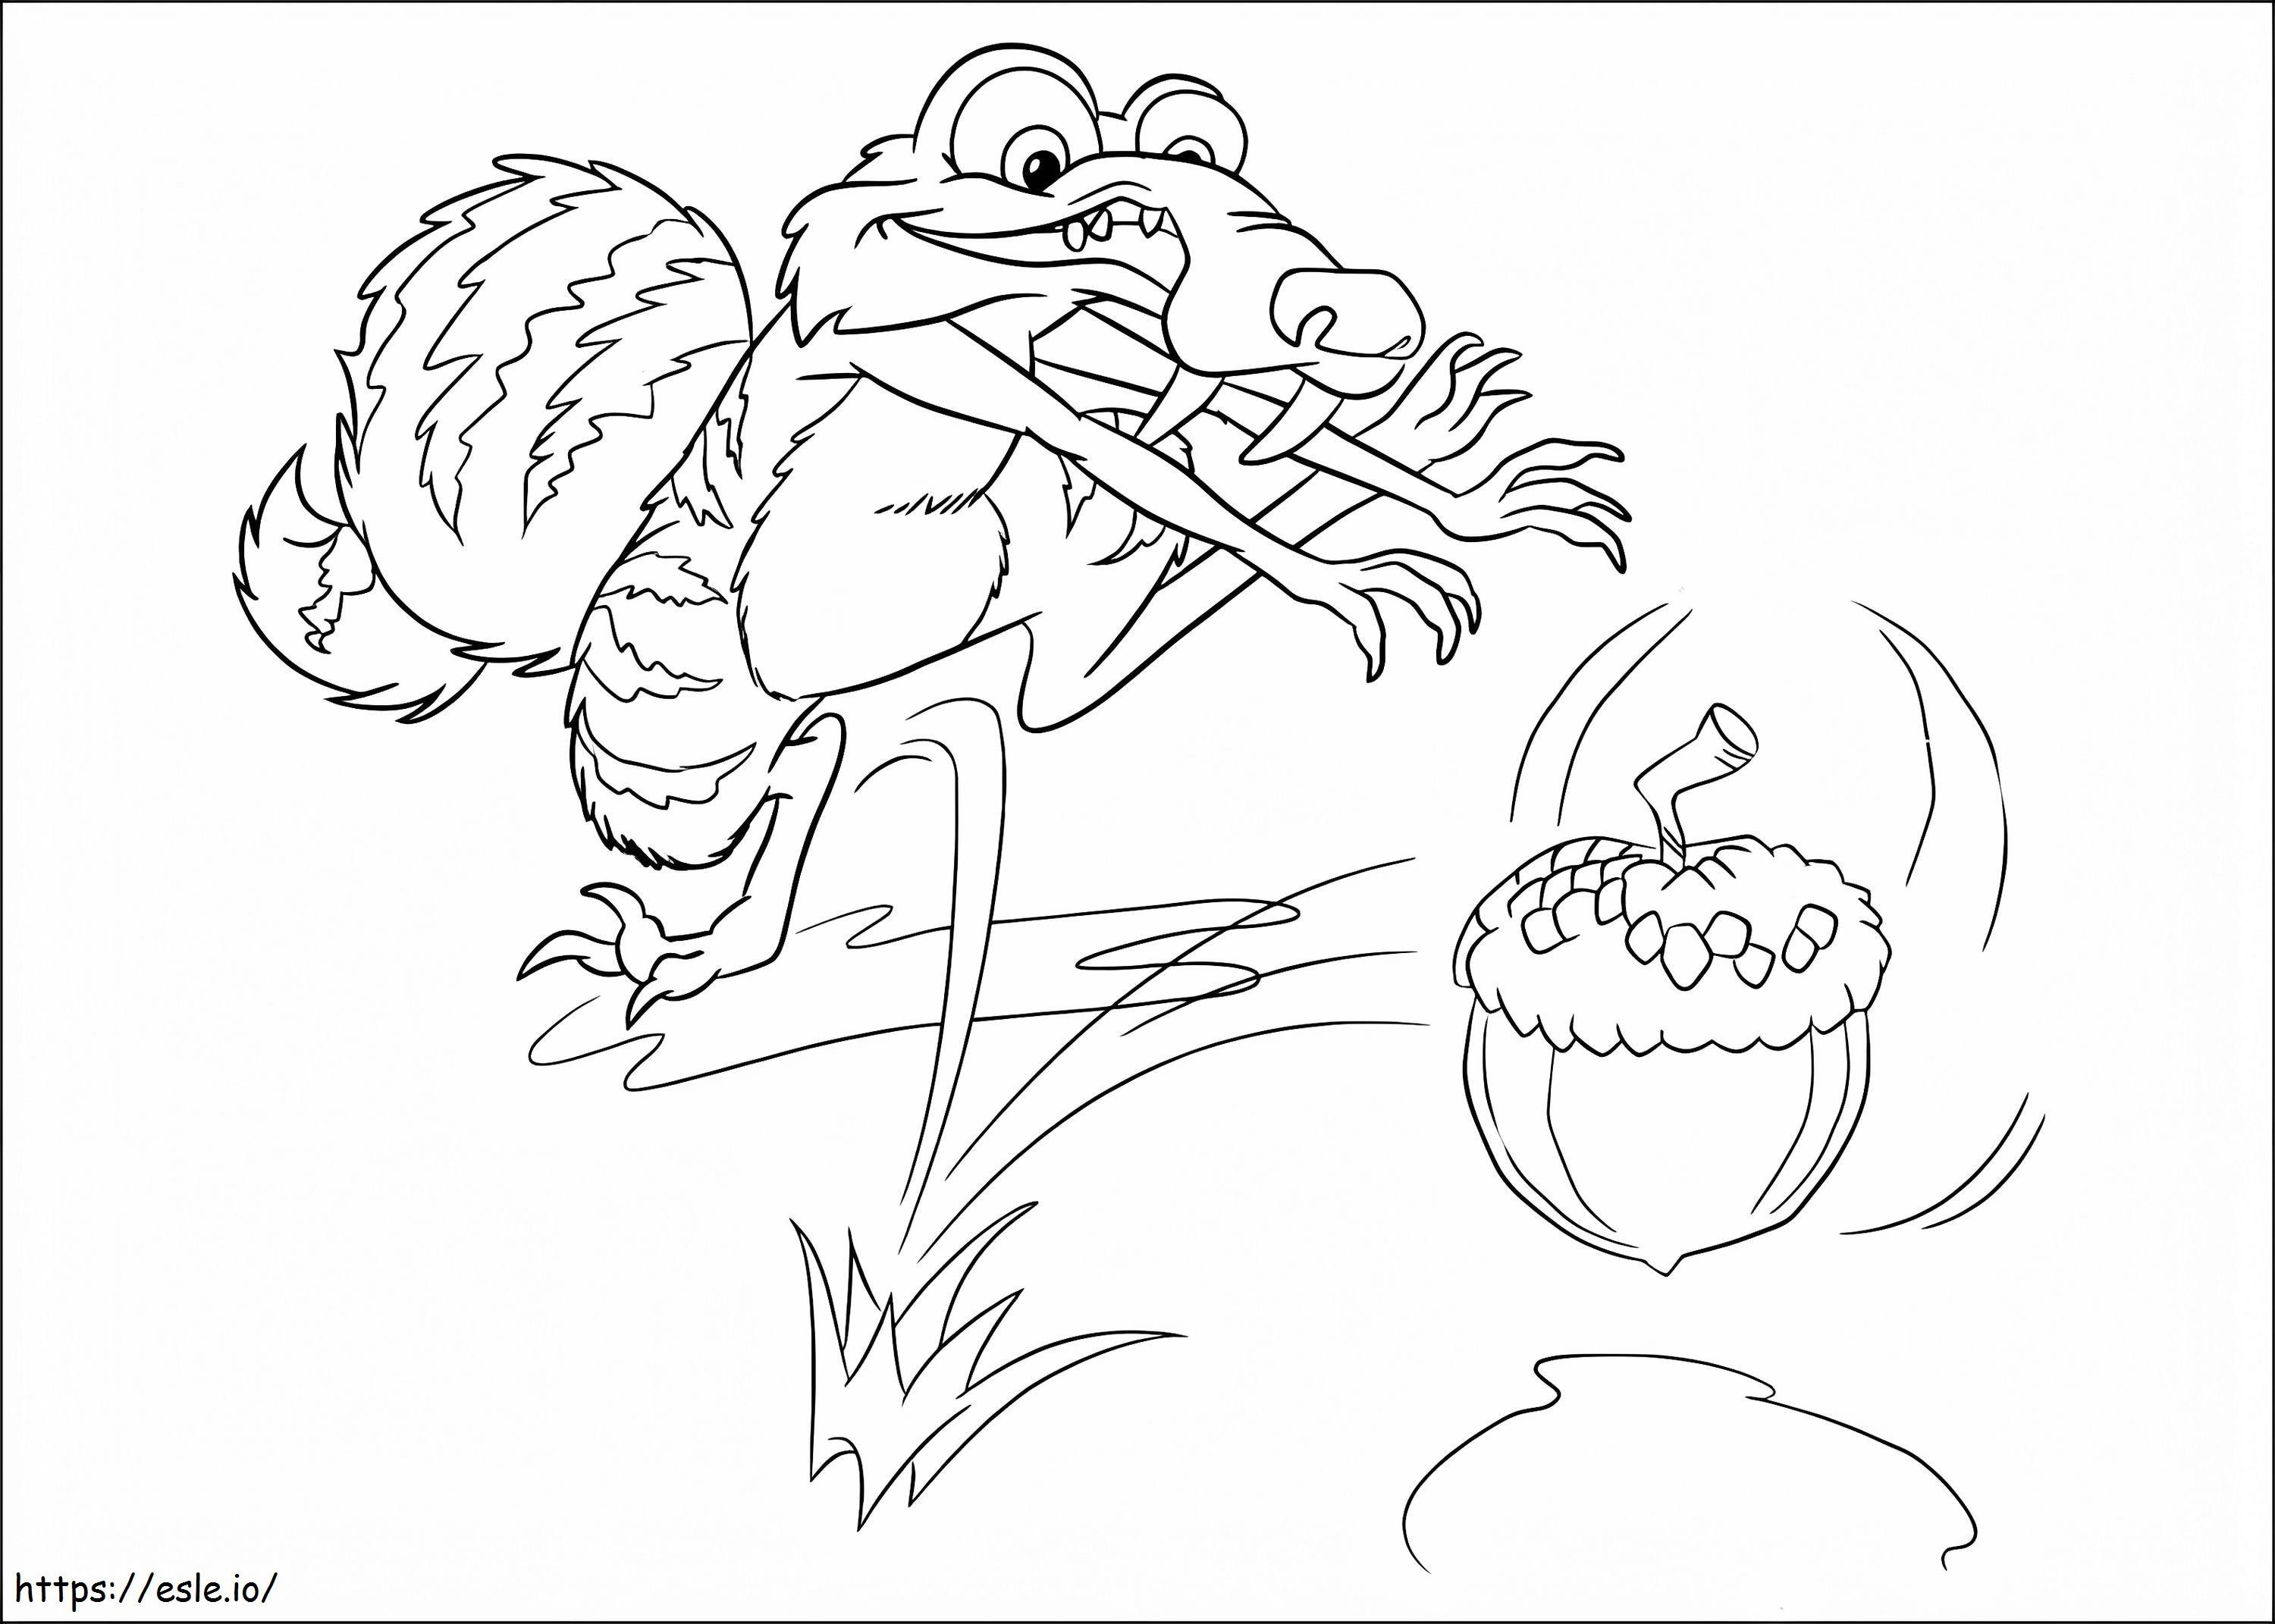 Scrat With Acorn coloring page